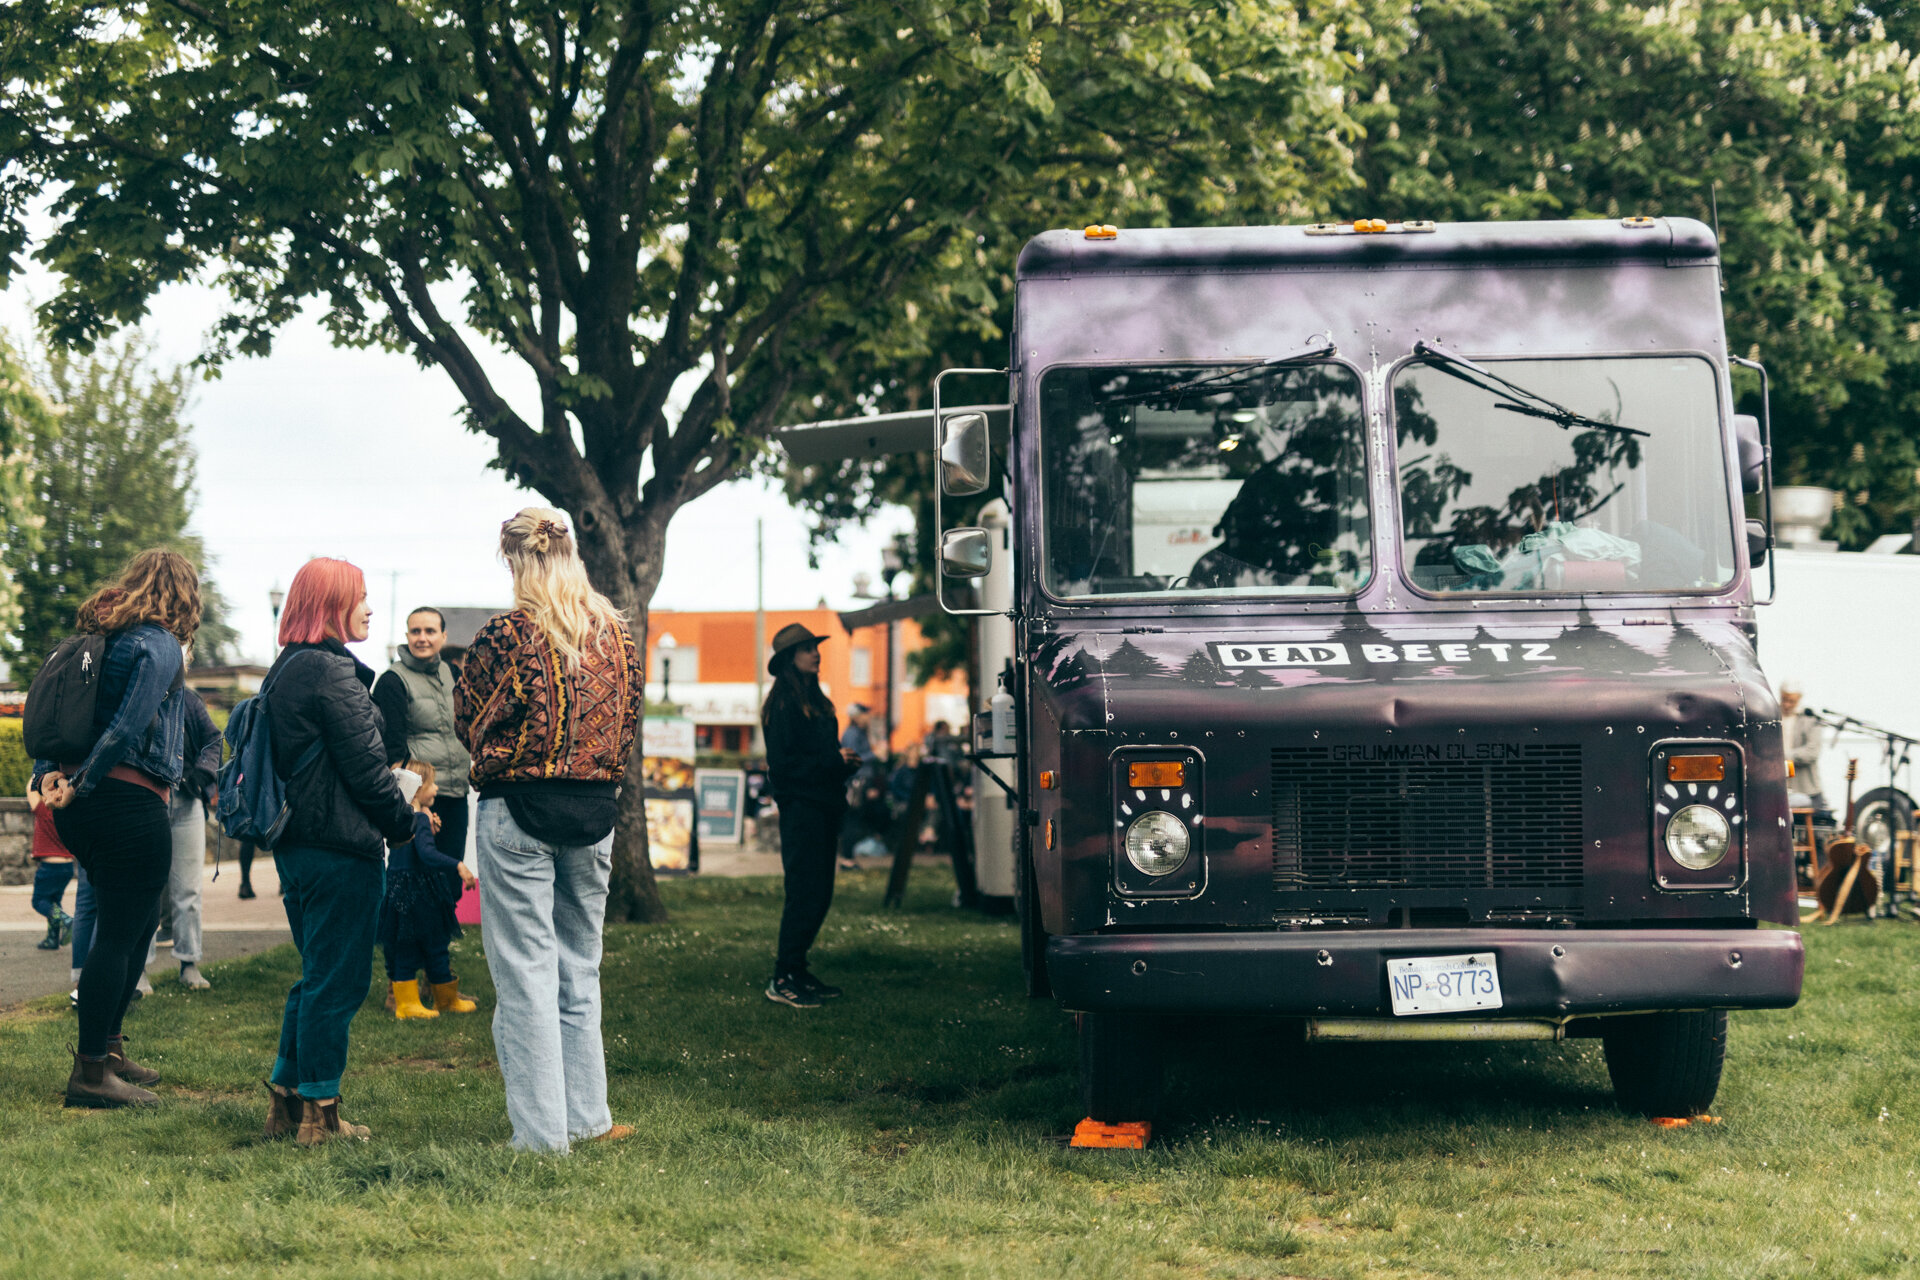 🚨First Market Alert!🚨

We're back on:

📅Thursday, April 4
🕒4:30 - 7:30 p.m.
📍Memorial Park 

And we're so excited to start the season! How do you go to the market? Do you like to meet up with friends and grab a bite from the food trucks before g